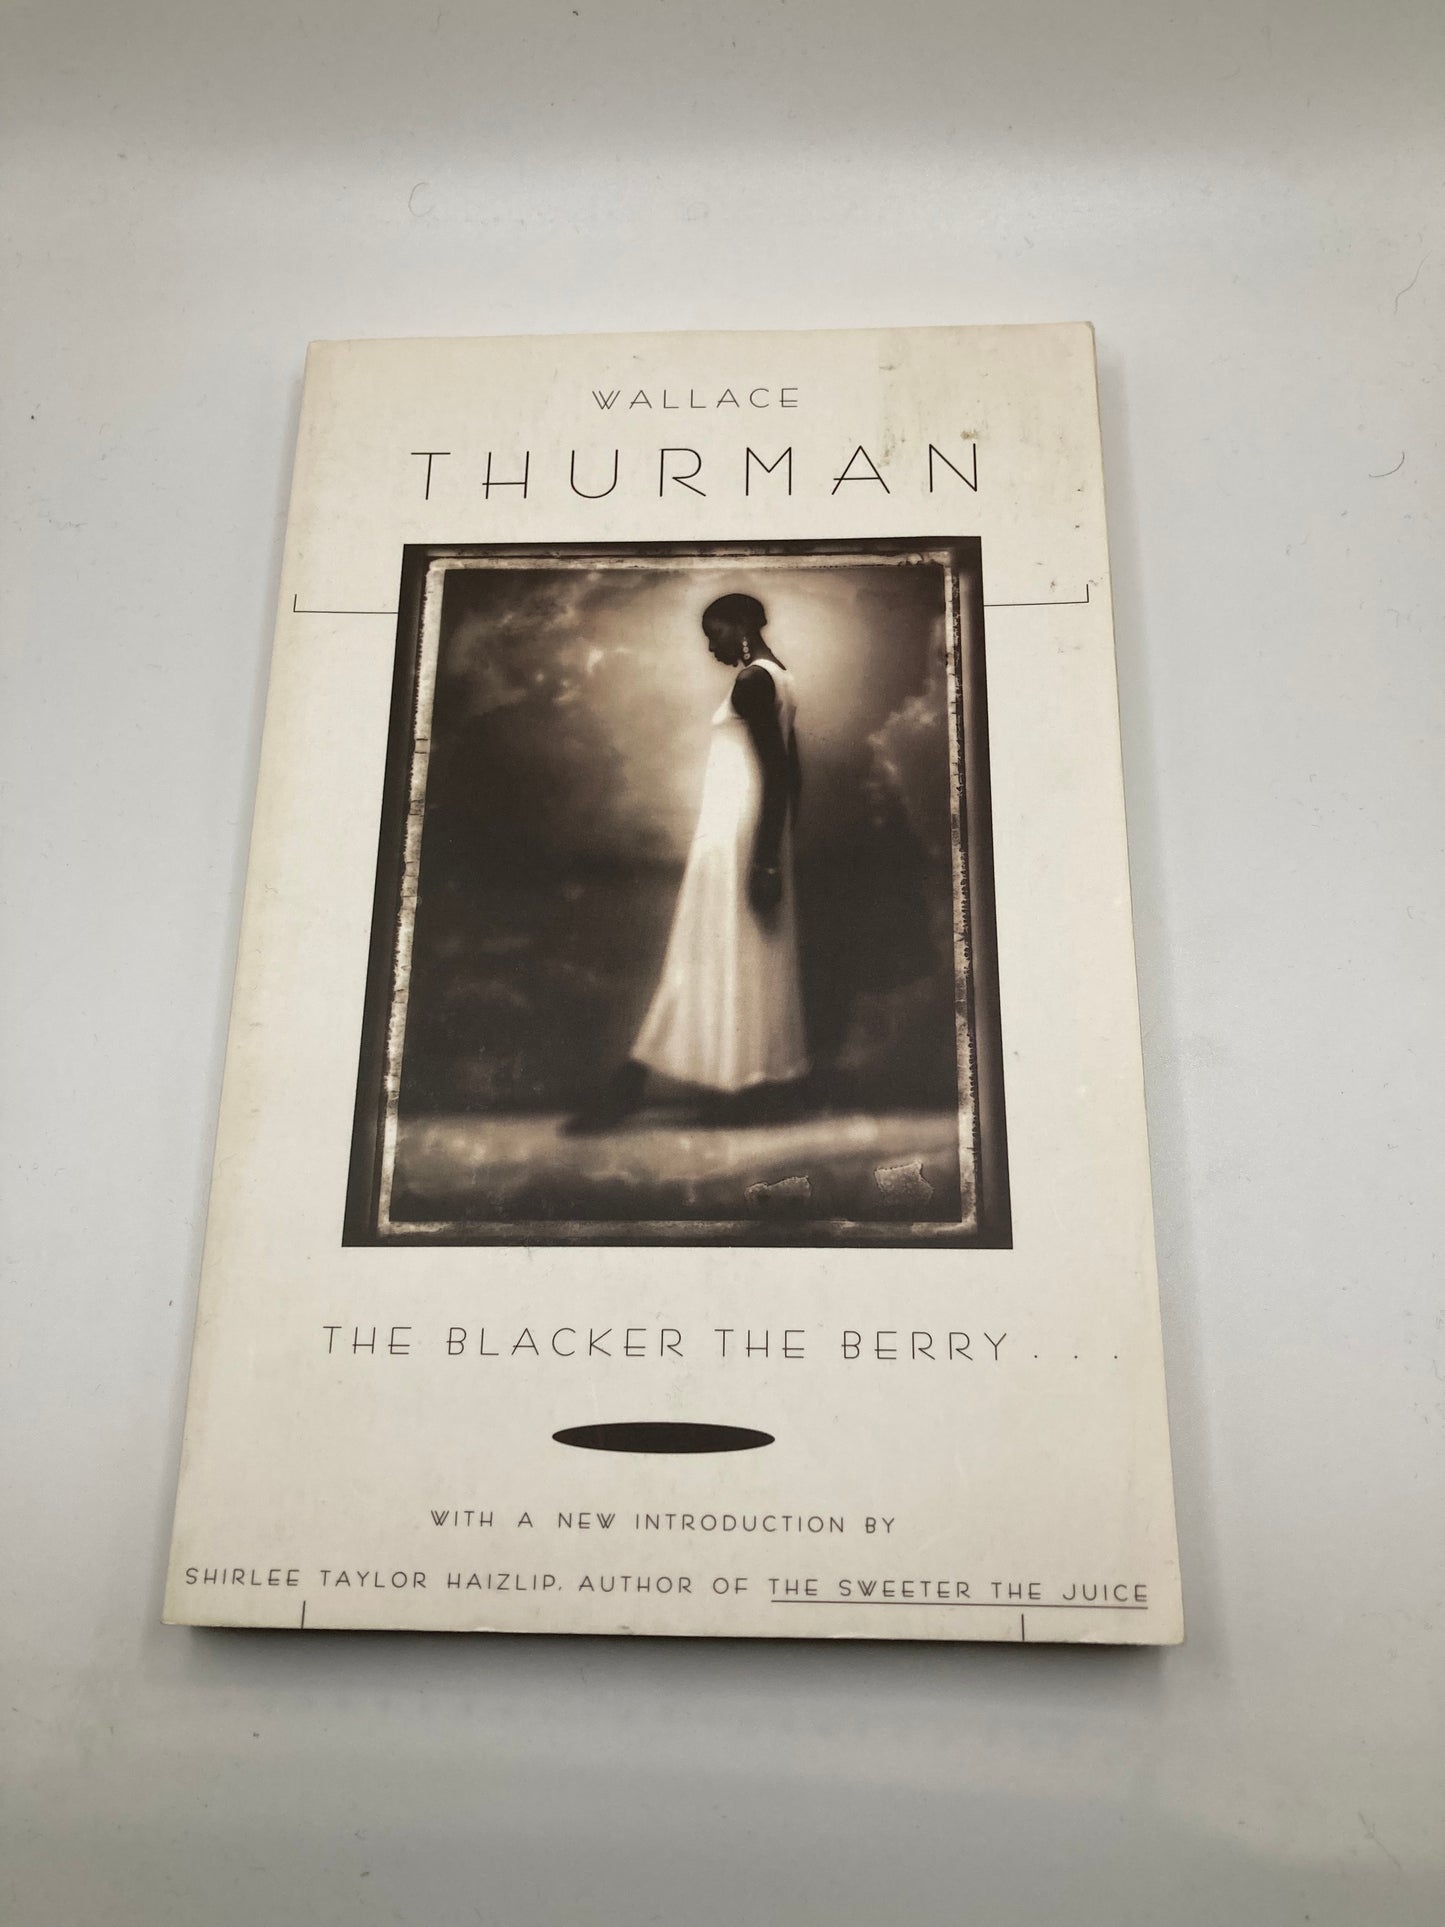 The Blacker The Berry by Wallace Thurman